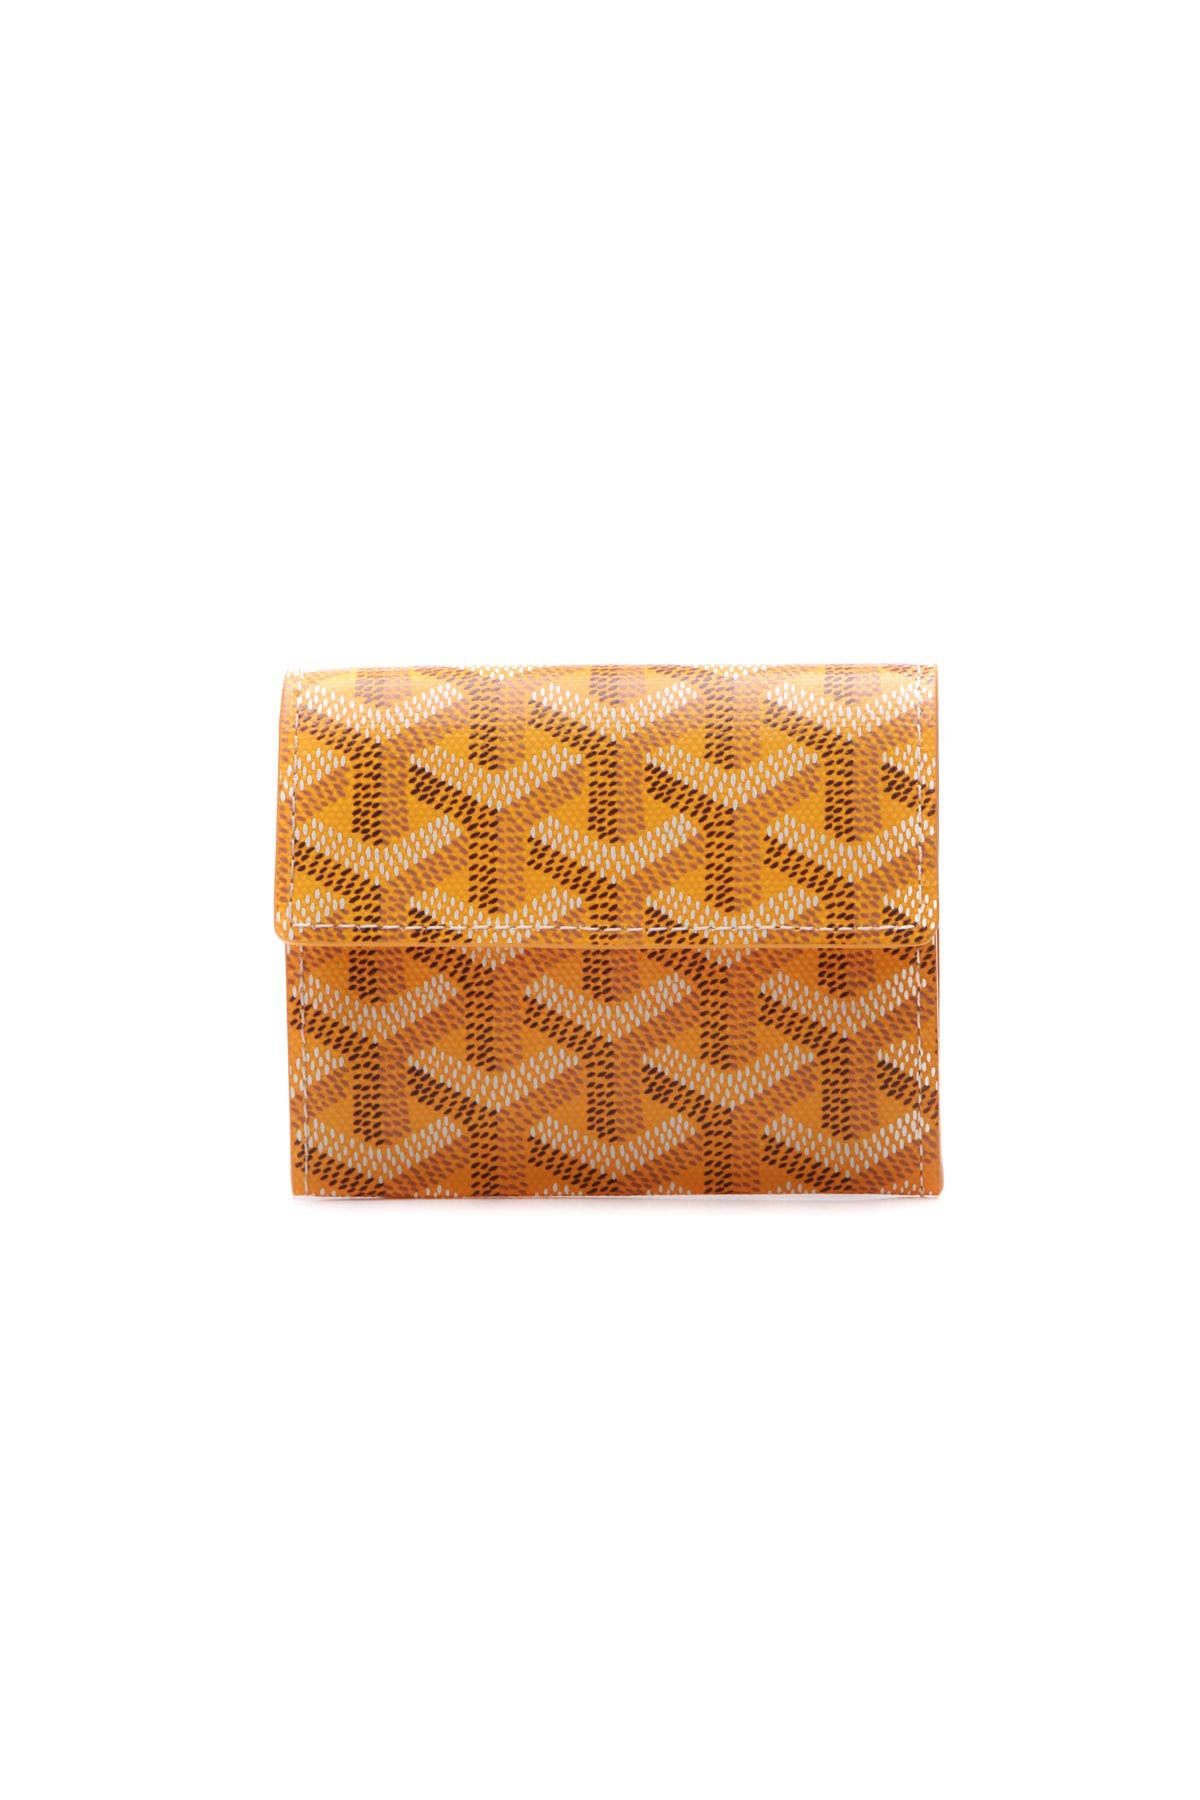 Goyard Marigny Wallet White in Canvas/Calfskin Leather with